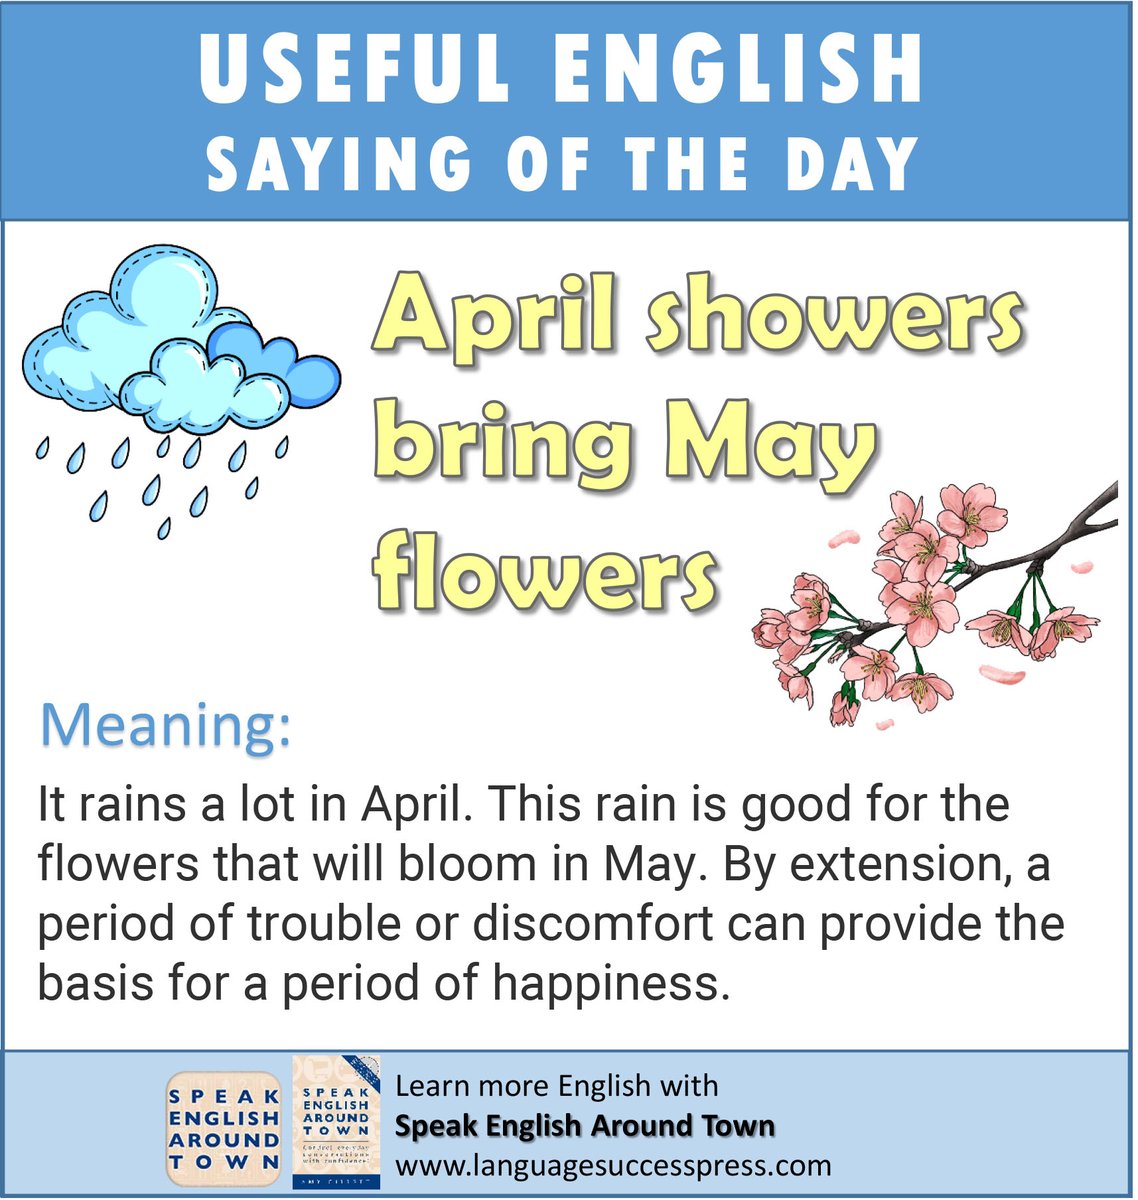 Useful #English - It's raining today! But that's okay because ... 🌧️🌻🌷💐